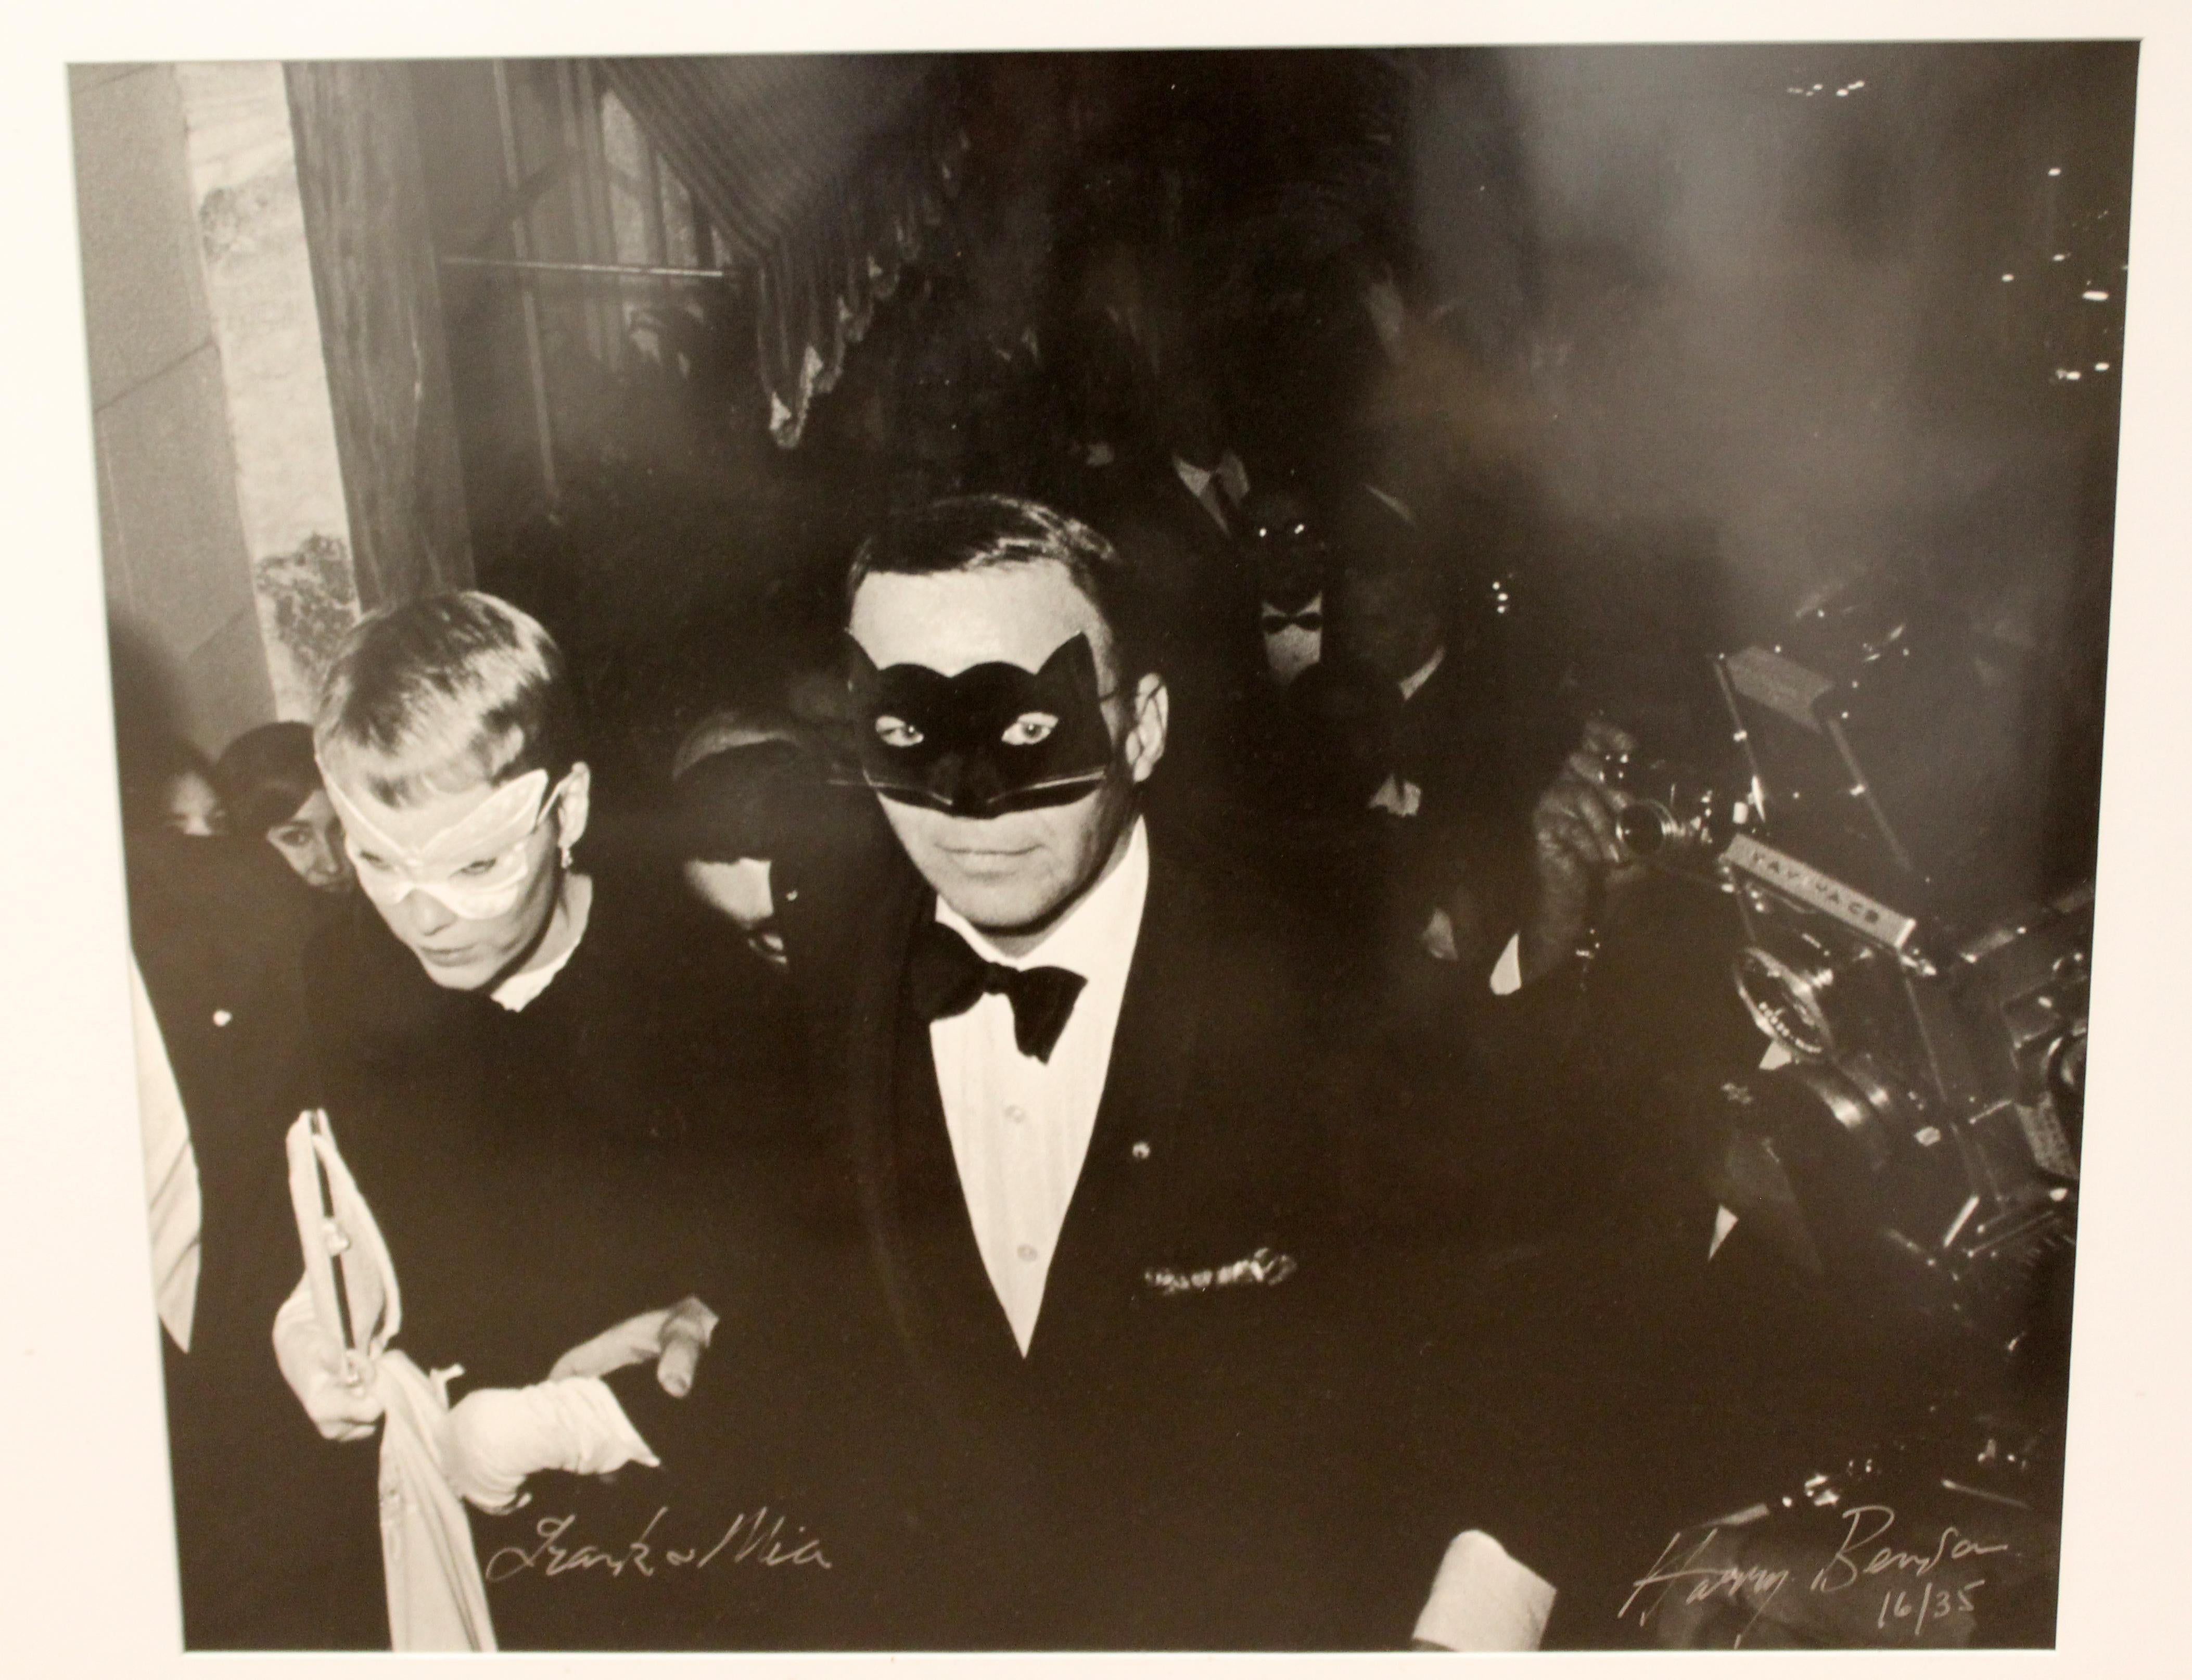 For your consideration is a framed print of a Harry Benson photograph that shows Frank Sinatra and Mia Farrow at the Capote Ball, circa 1966, numbered 16/35 and signed. In excellent condition. The dimensions of the frame are 40